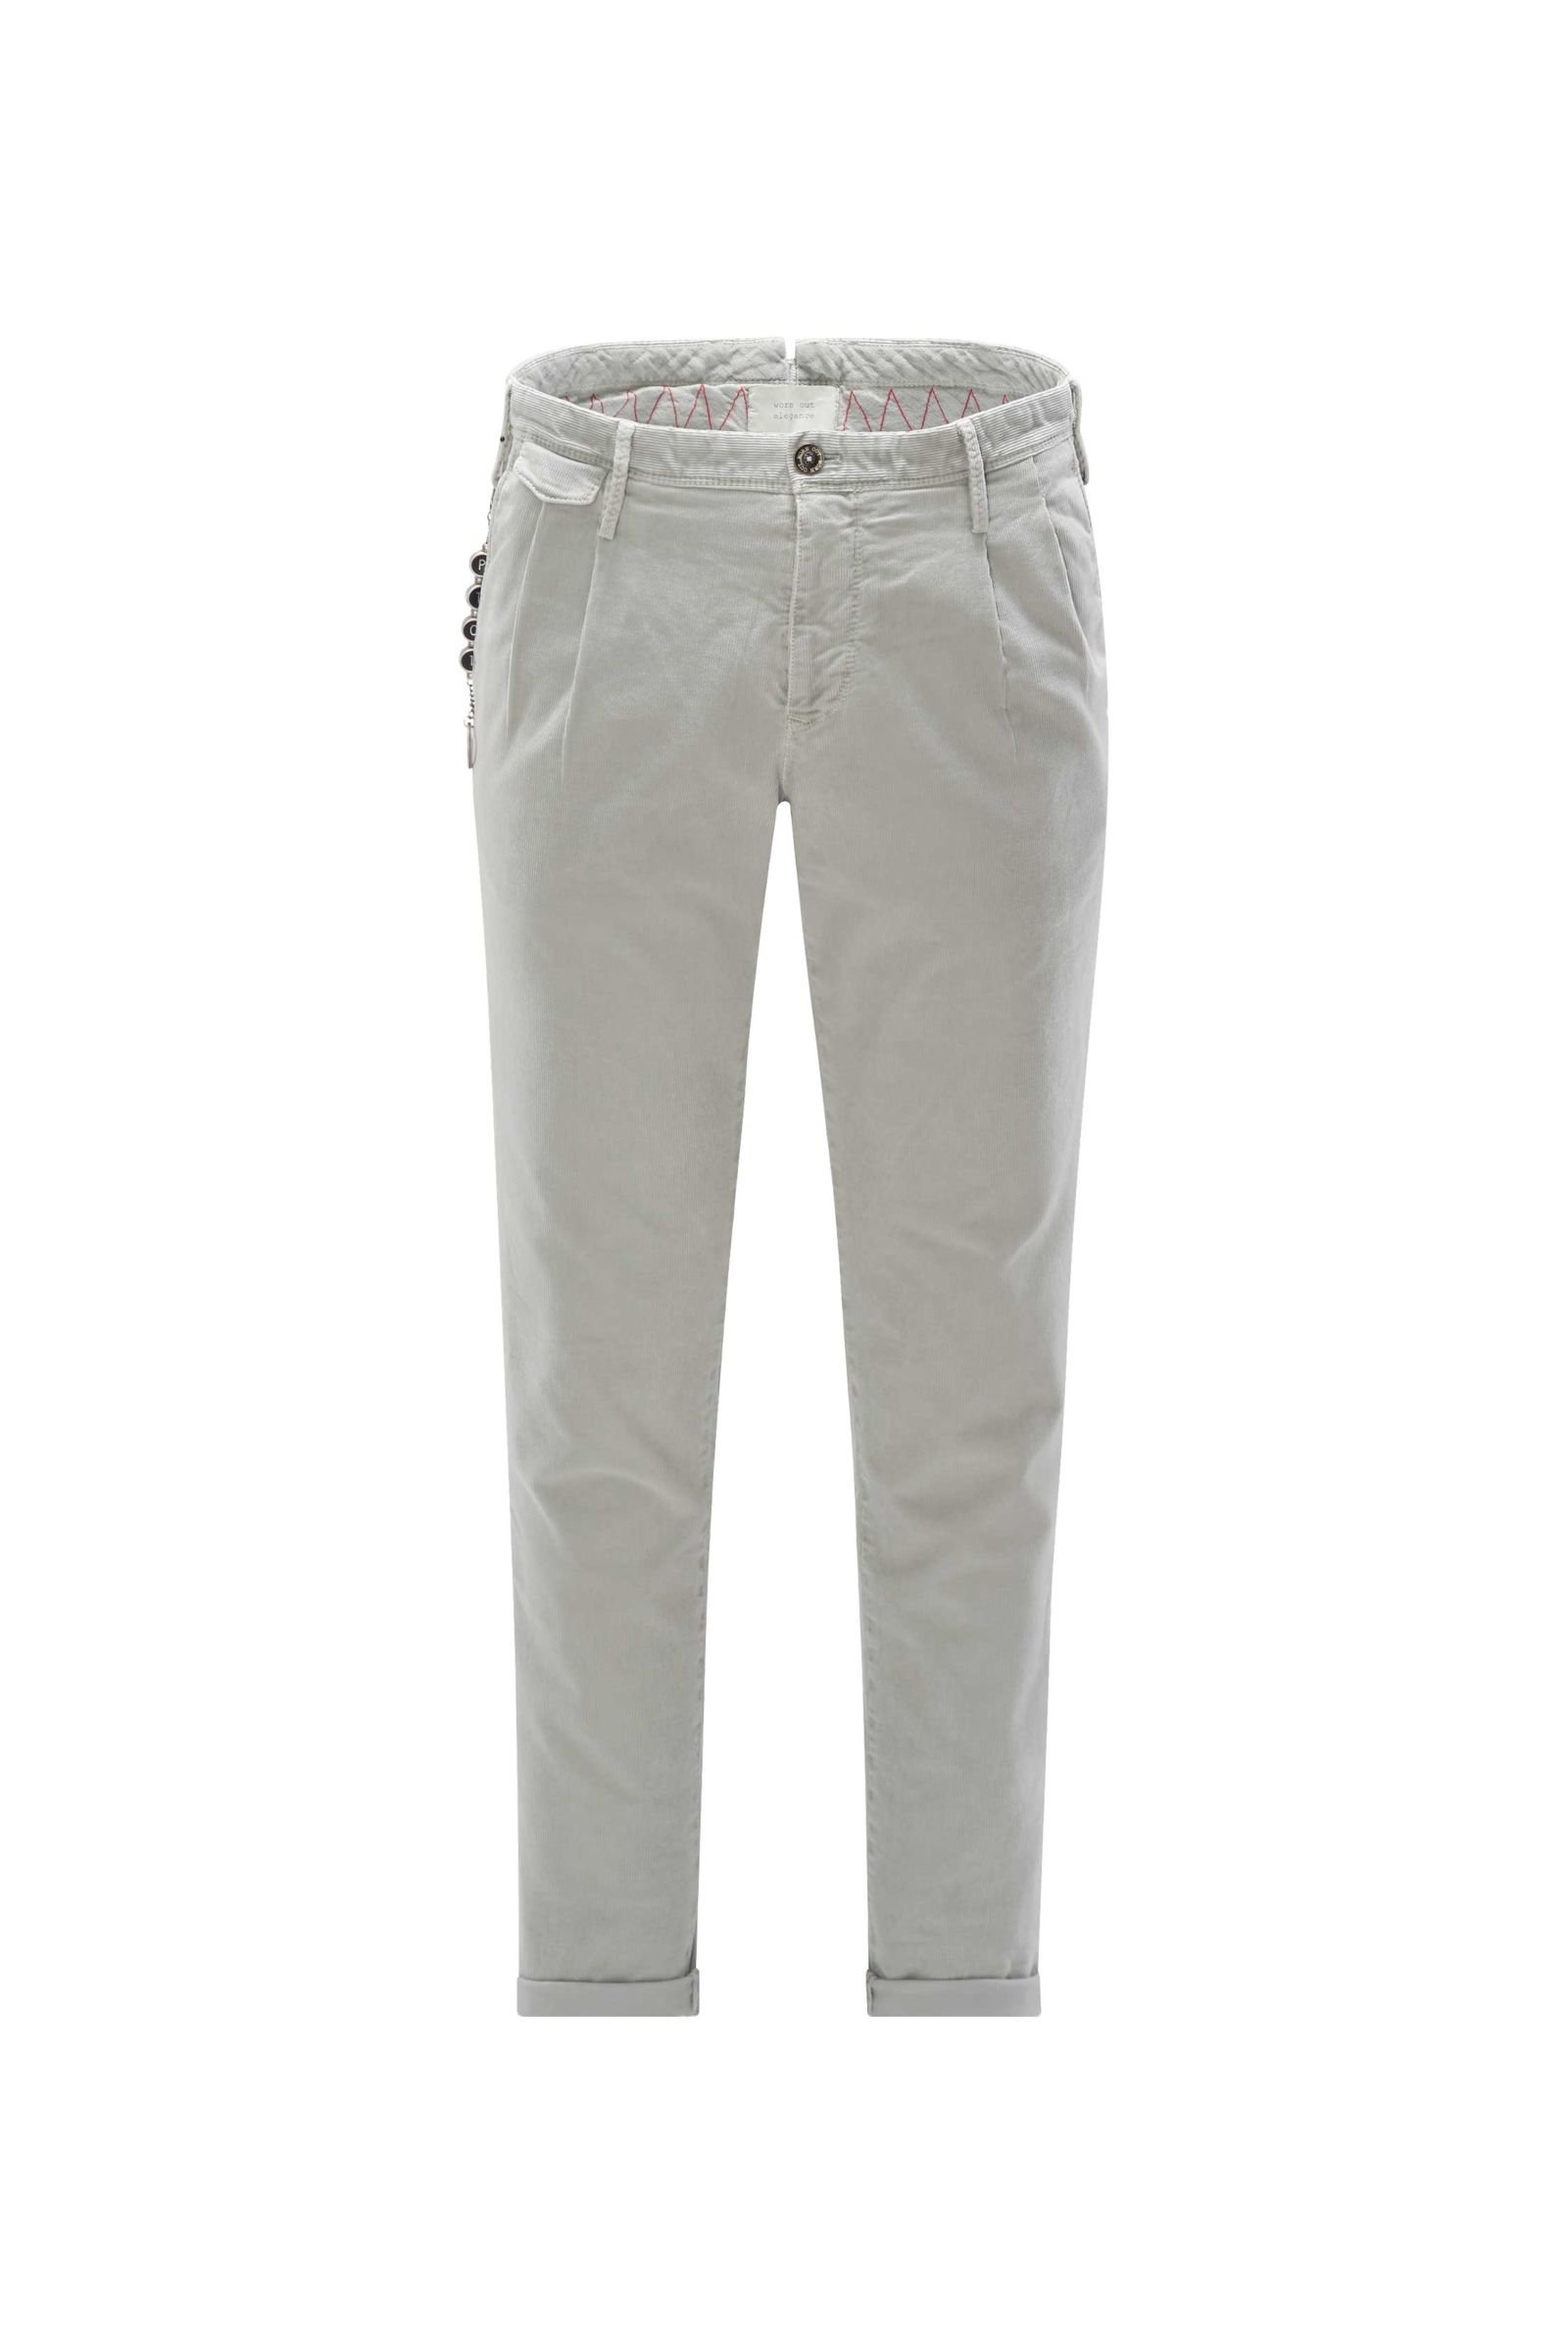 Corduroy trousers 'Arial Worn out Elegance' light grey